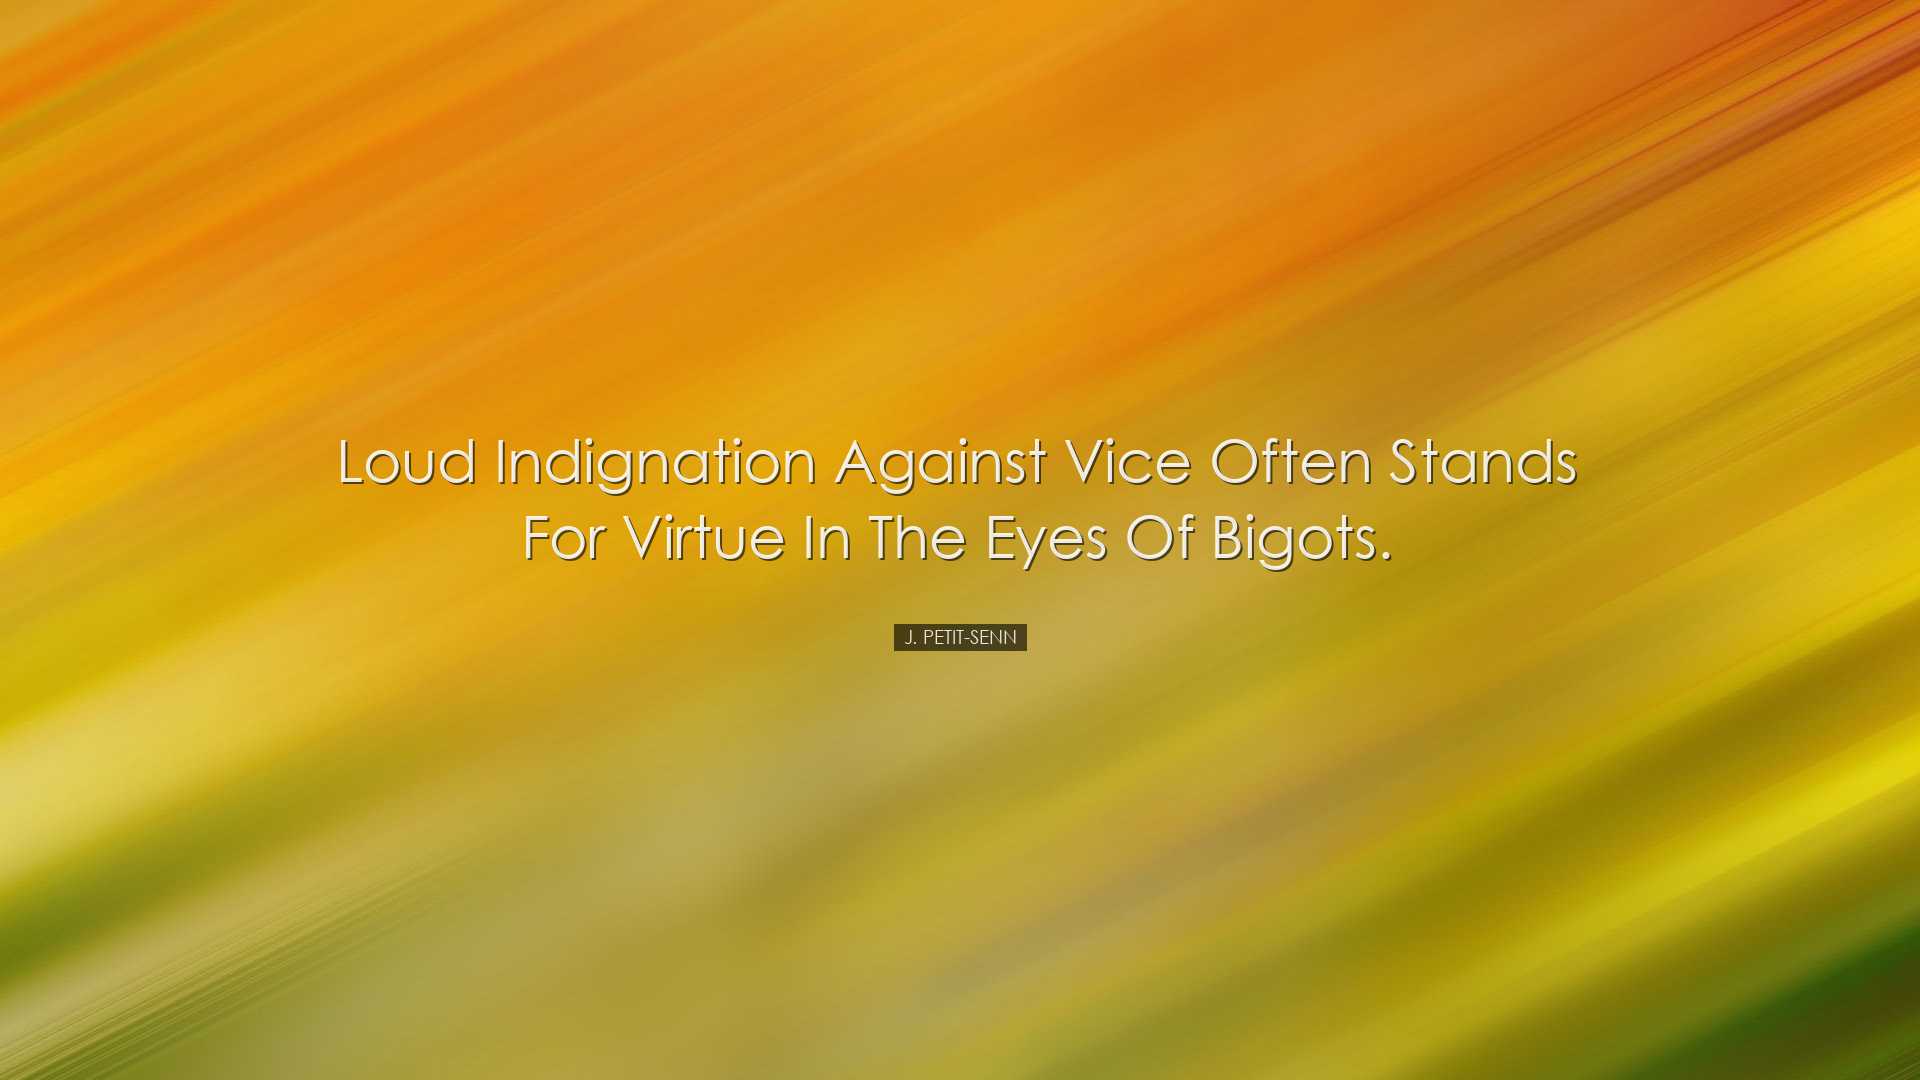 Loud indignation against vice often stands for virtue in the eyes